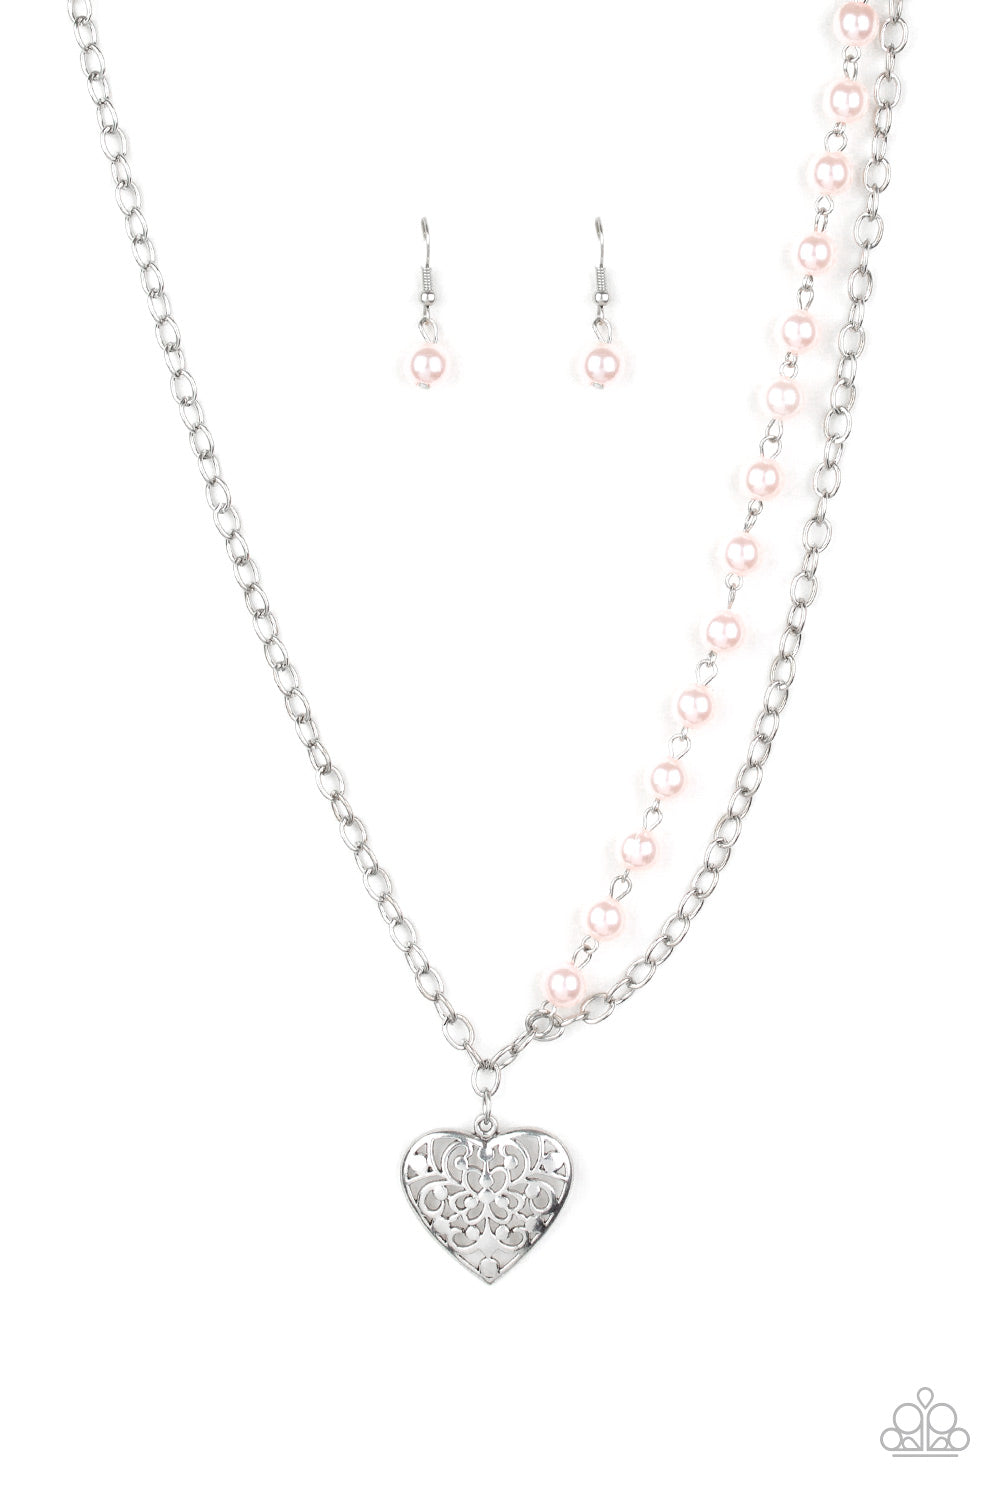 Paparazzi necklace - Forever In My Heart - Pink